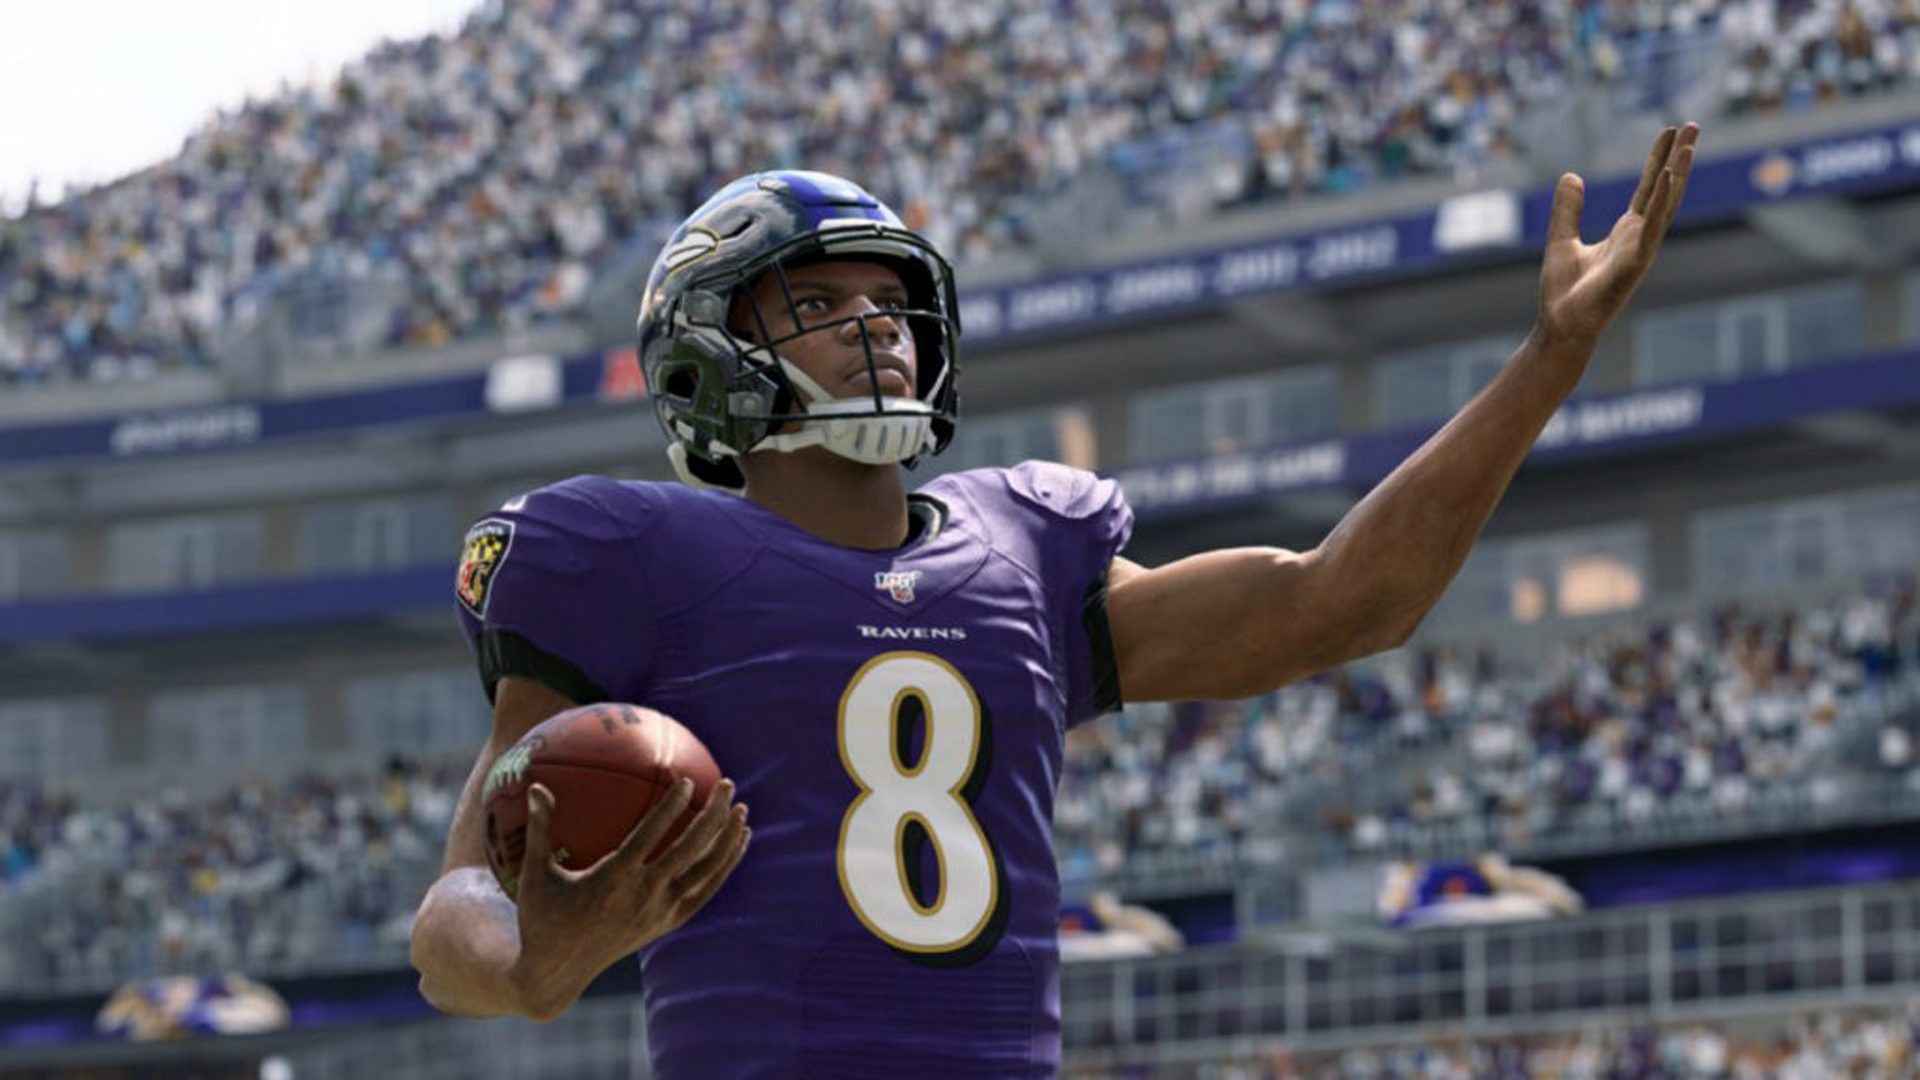 Madden NFL 22 PC is last-gen because EA wants “the best, quality experience on new consoles”